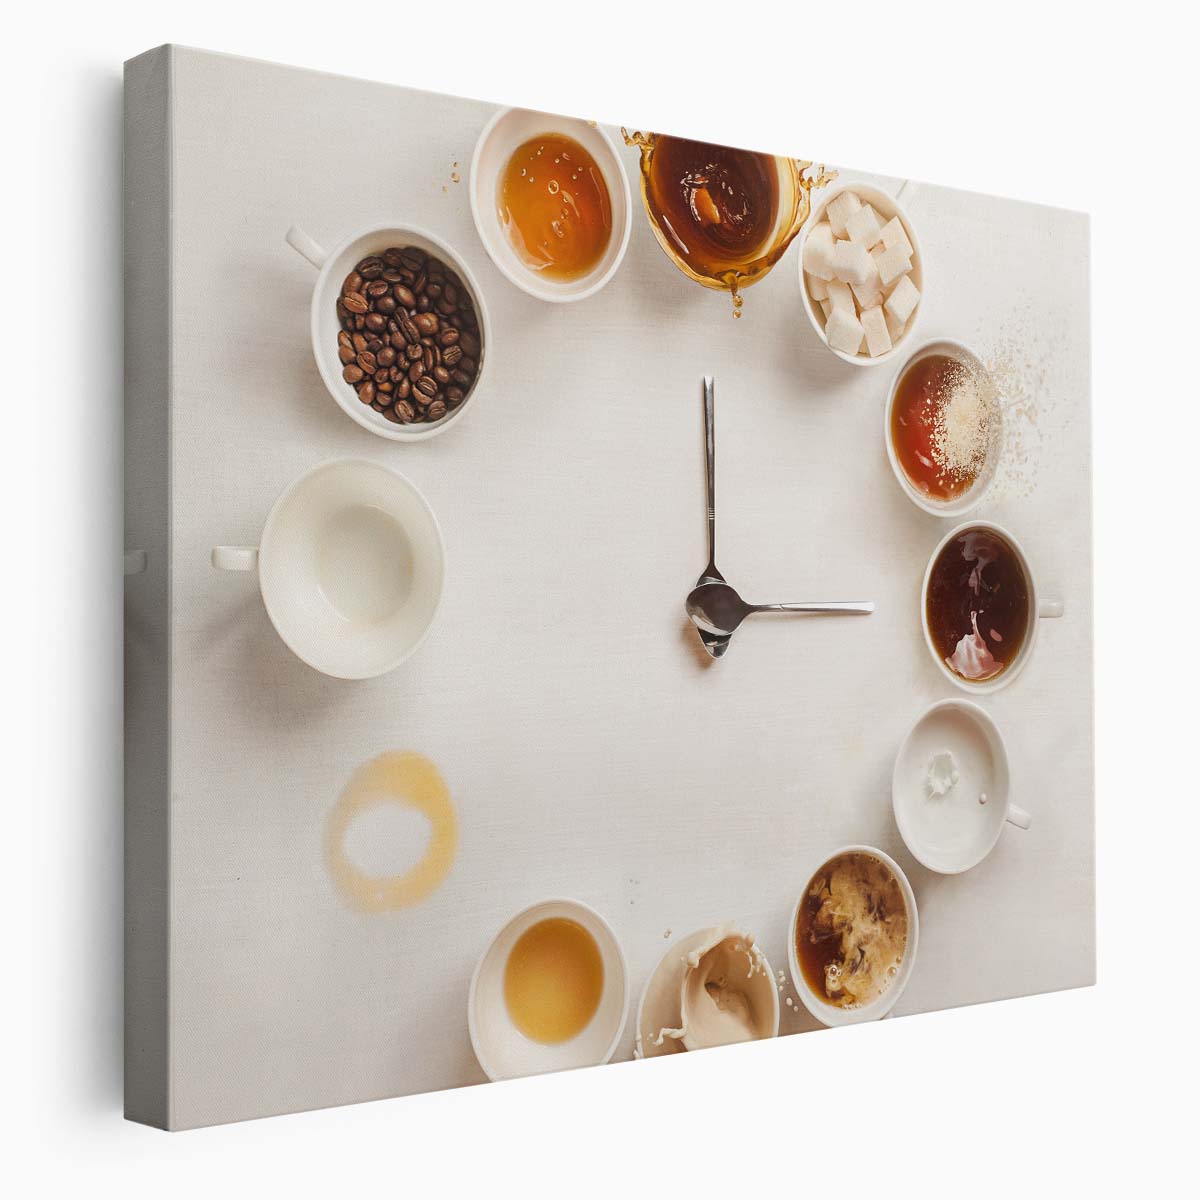 Coffee Time Splendor Cups, Beans & Splashes Wall Art by Luxuriance Designs. Made in USA.